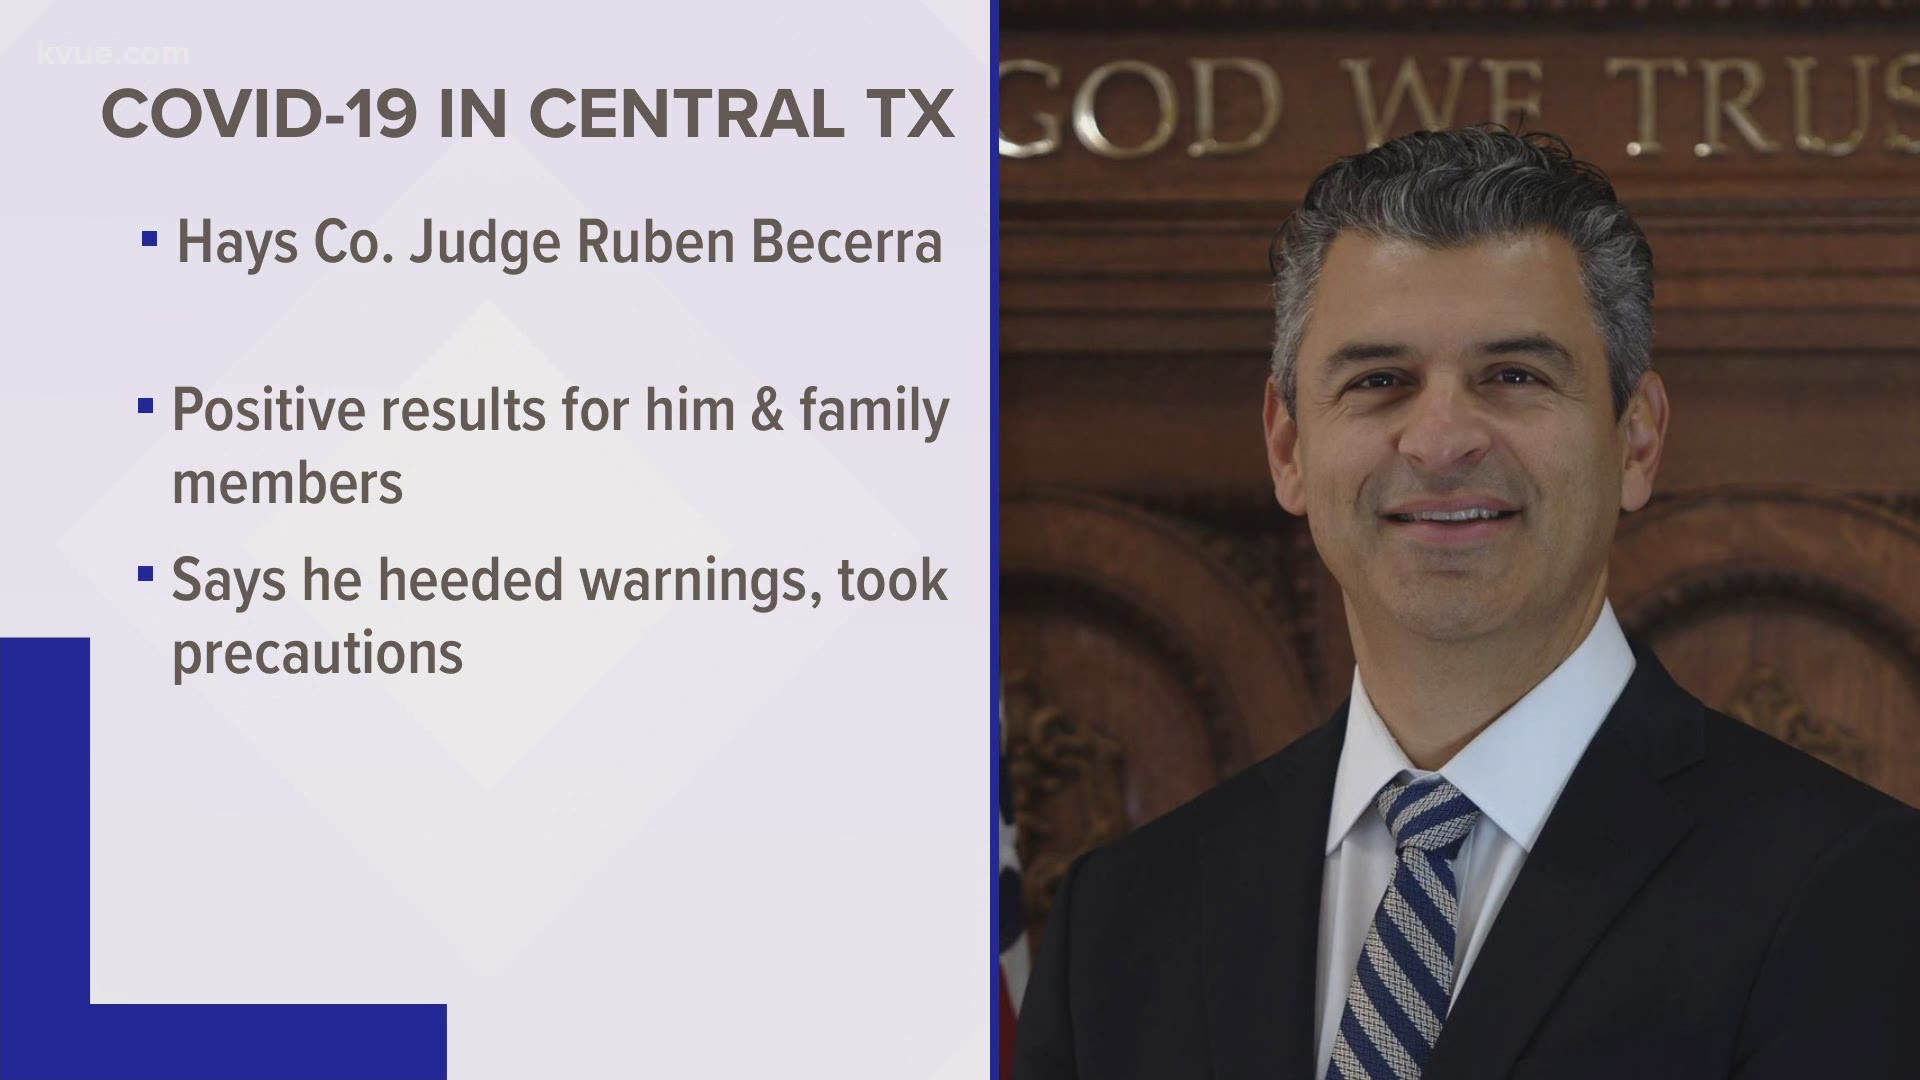 Hays County Judge Ruben Becerra confirmed he and his entire family have tested positive for COVID-19.